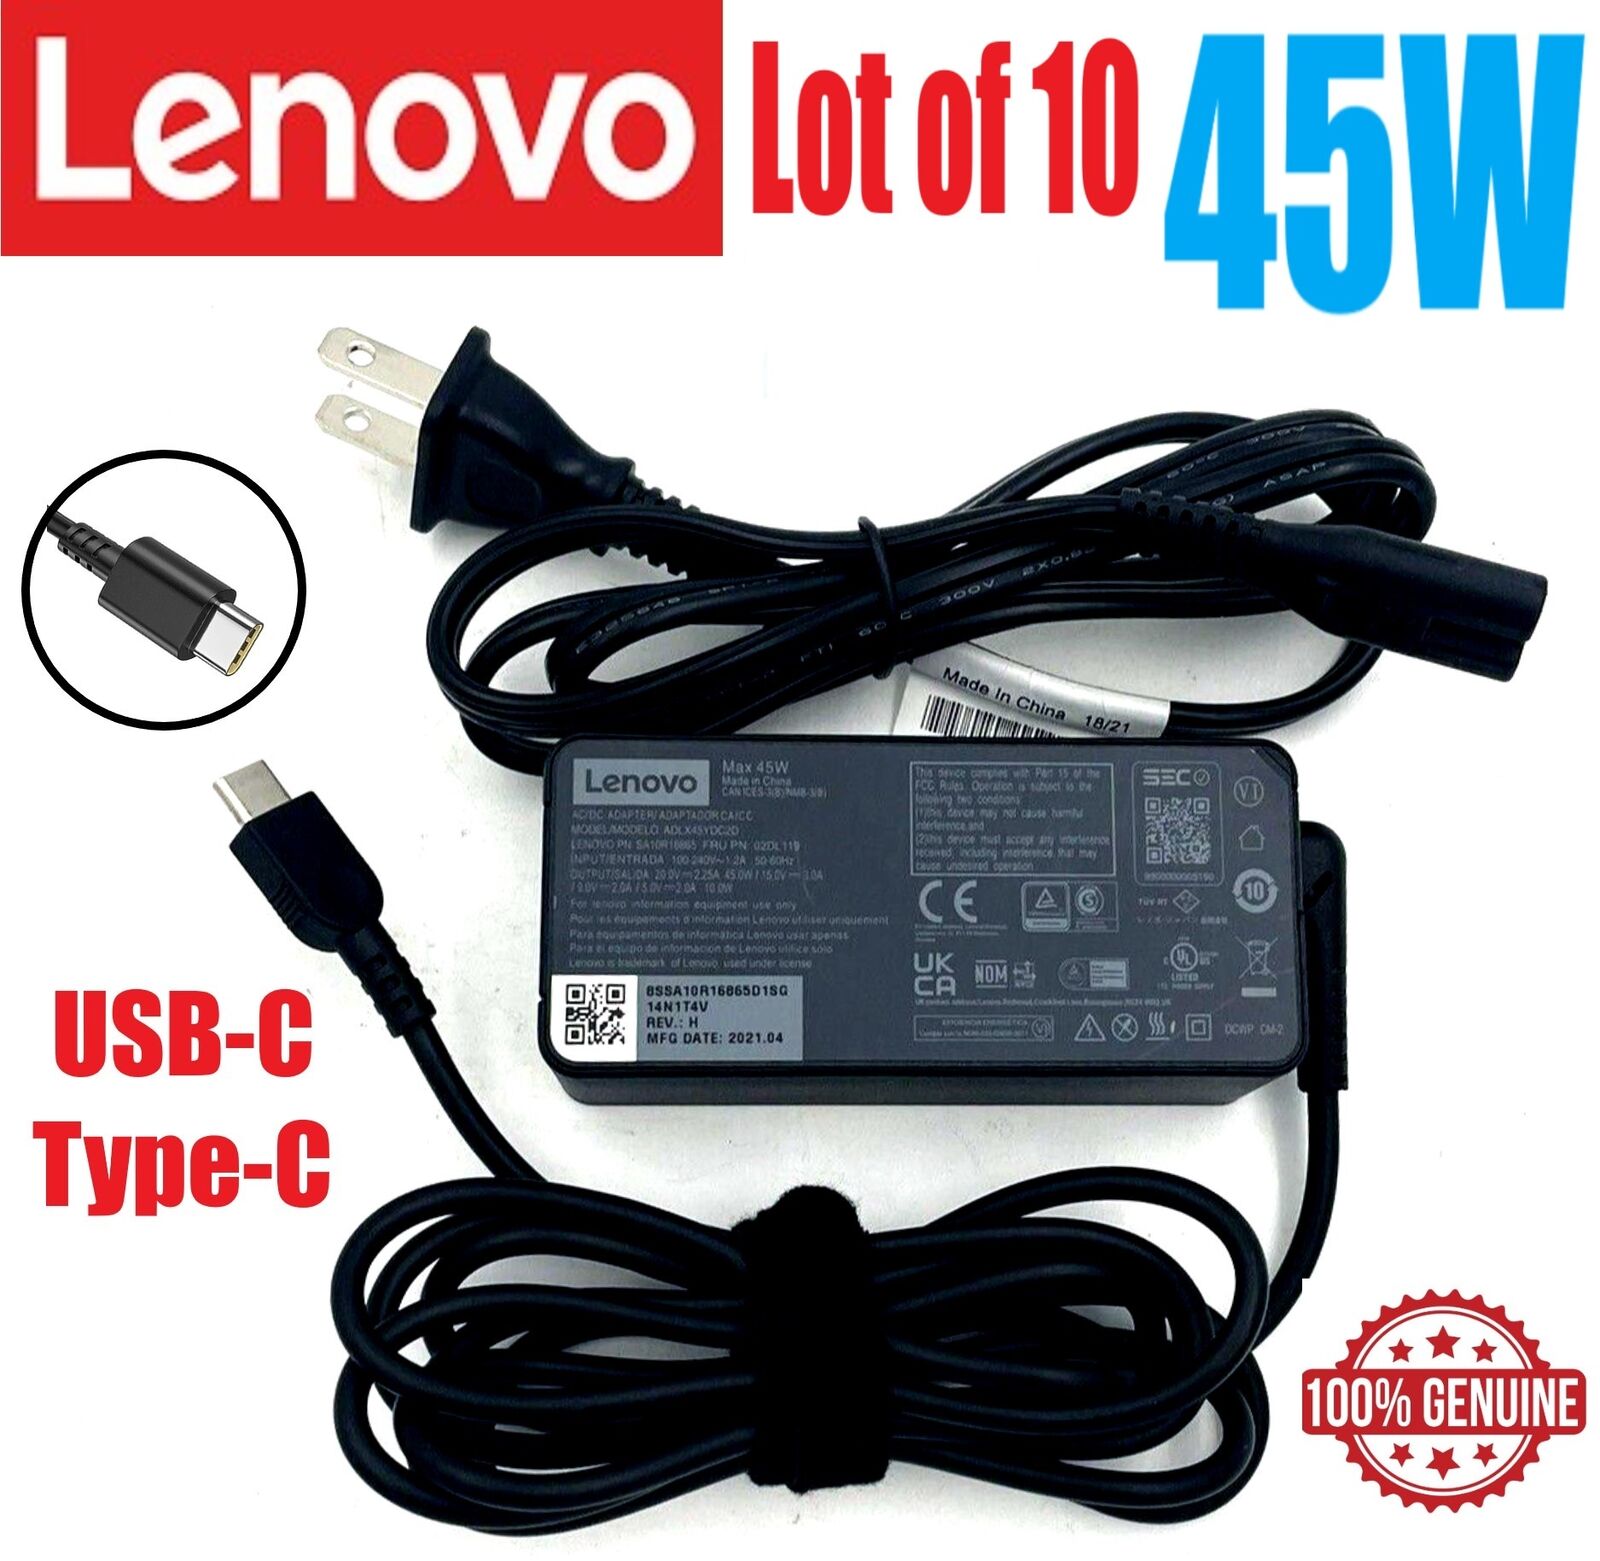 LOT 10 Lenovo IdeaPad Yoga Carbon USB-C TYPE-C 45W 20V 2.25A AC Adapter Charger